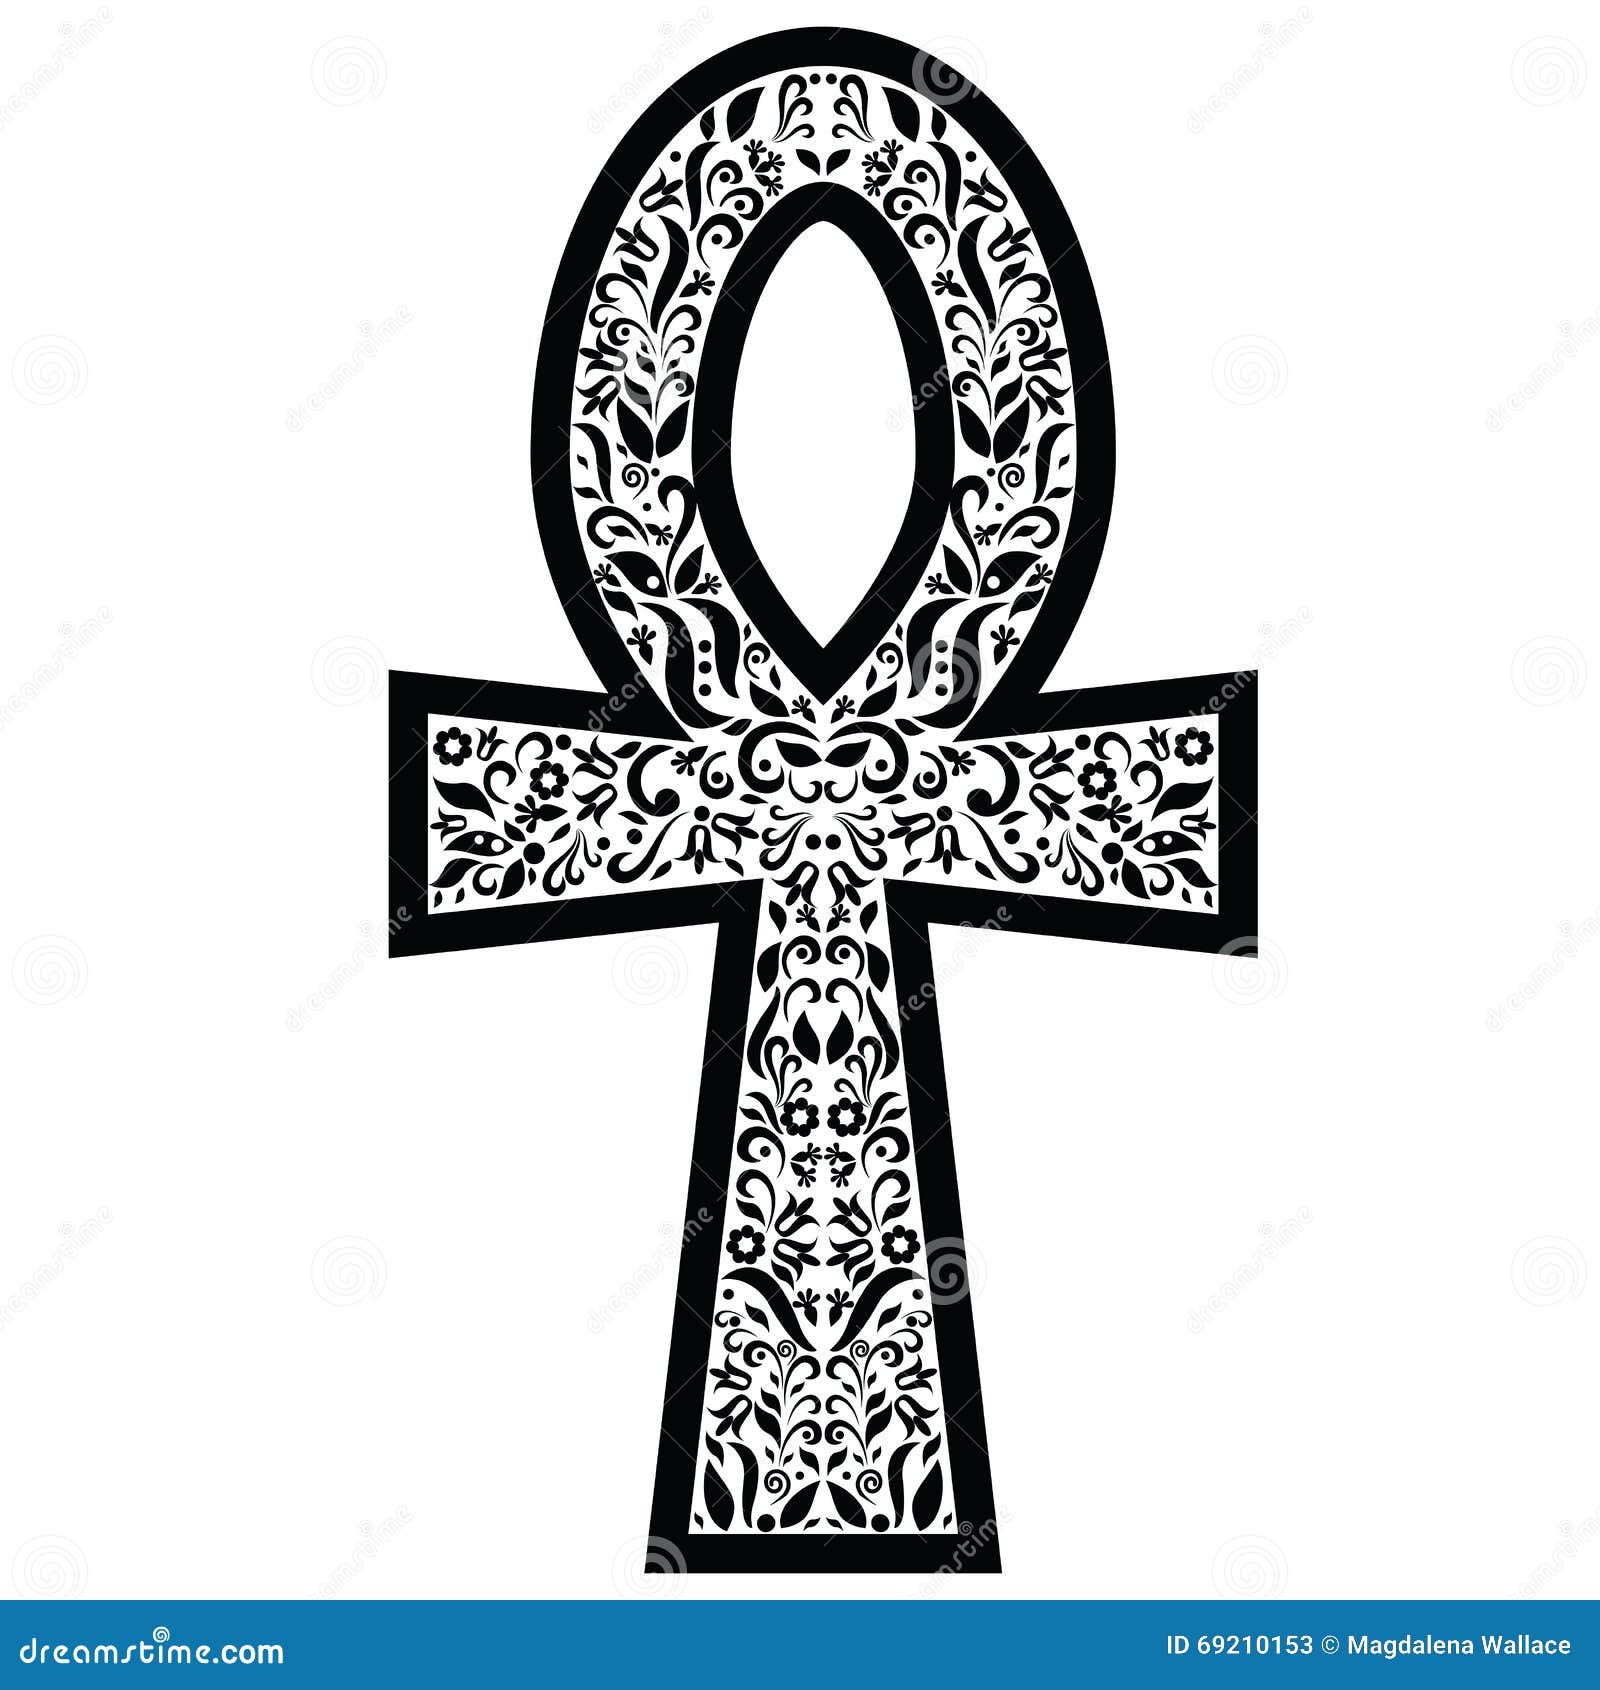 ankhkey of life  was the ancient Egyptian hieroglyphic character that  read life  Ankh tattoo Egyptian tattoo Tattoos with meaning